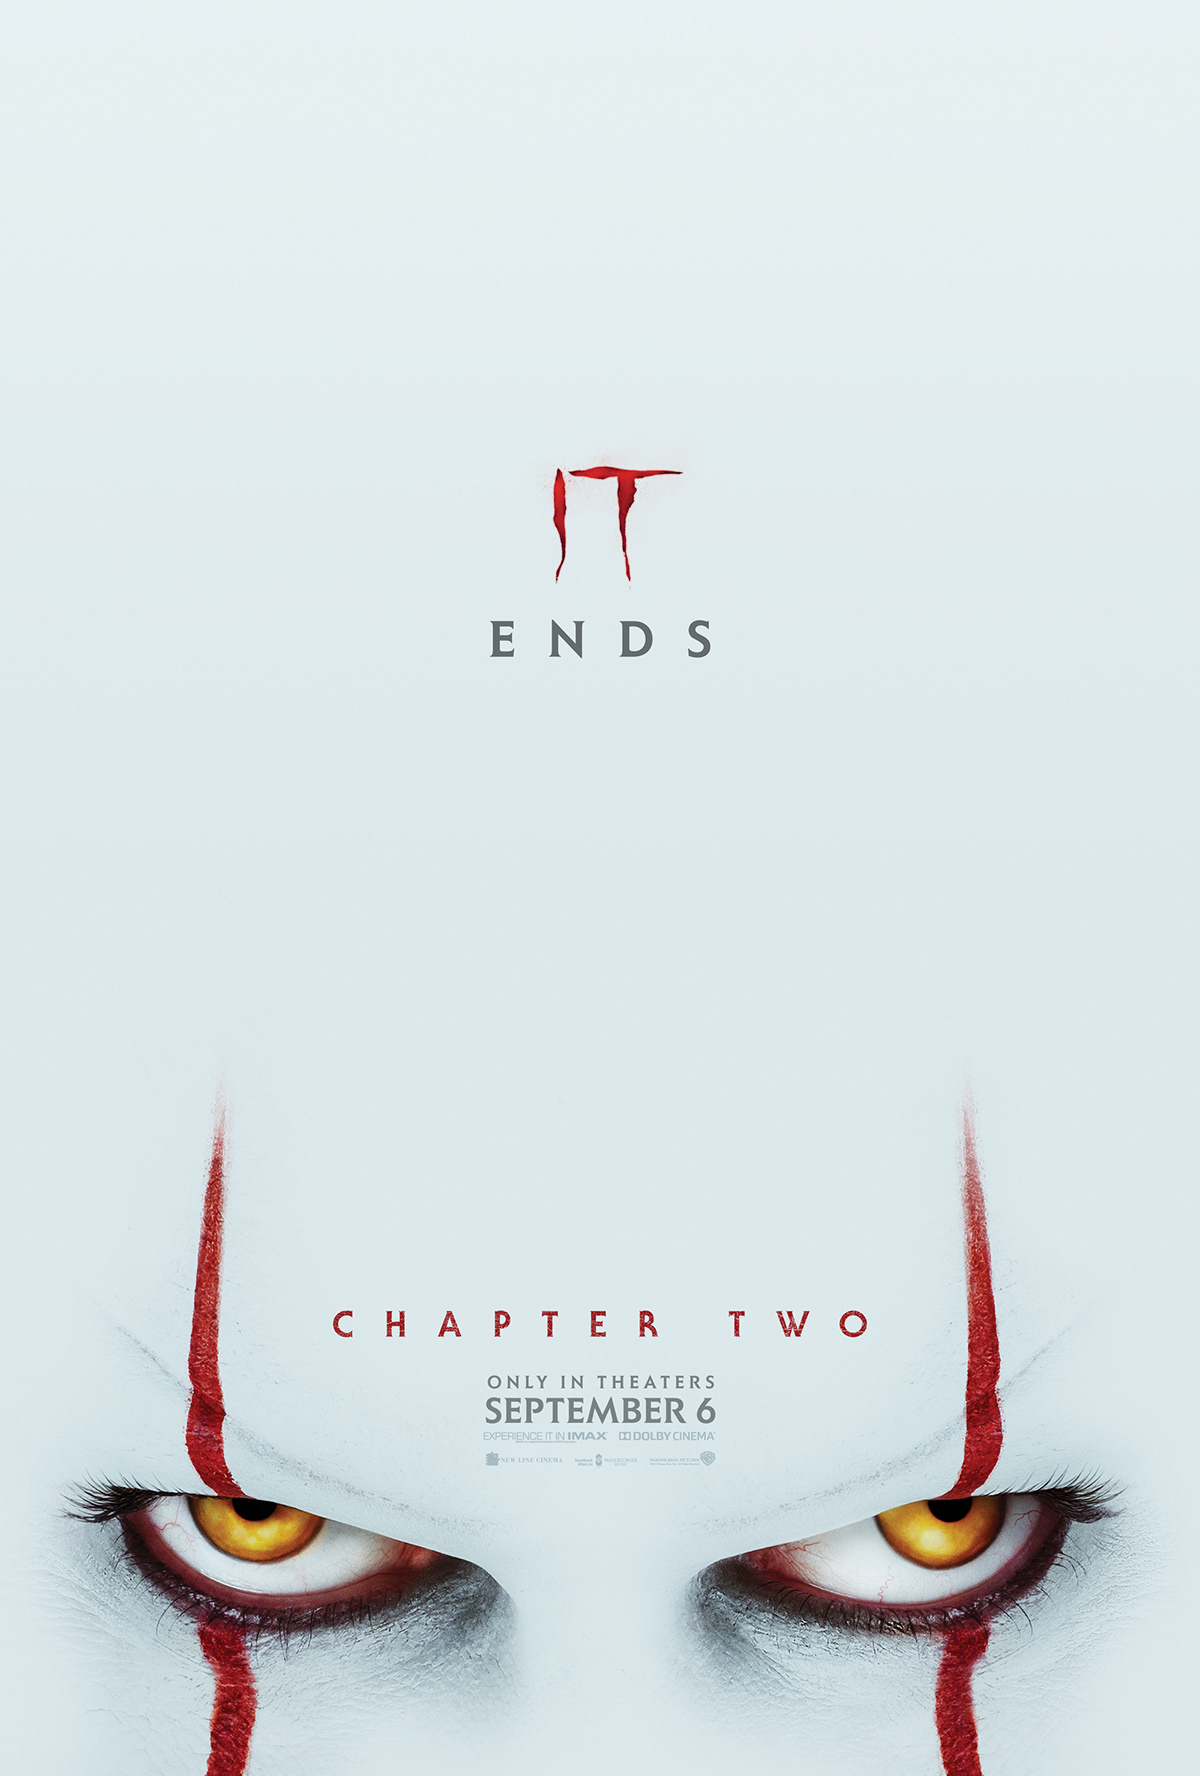 bill skarsgård horror IT IT chapter two key art movie poster one sheet pennywise poster Stephen King